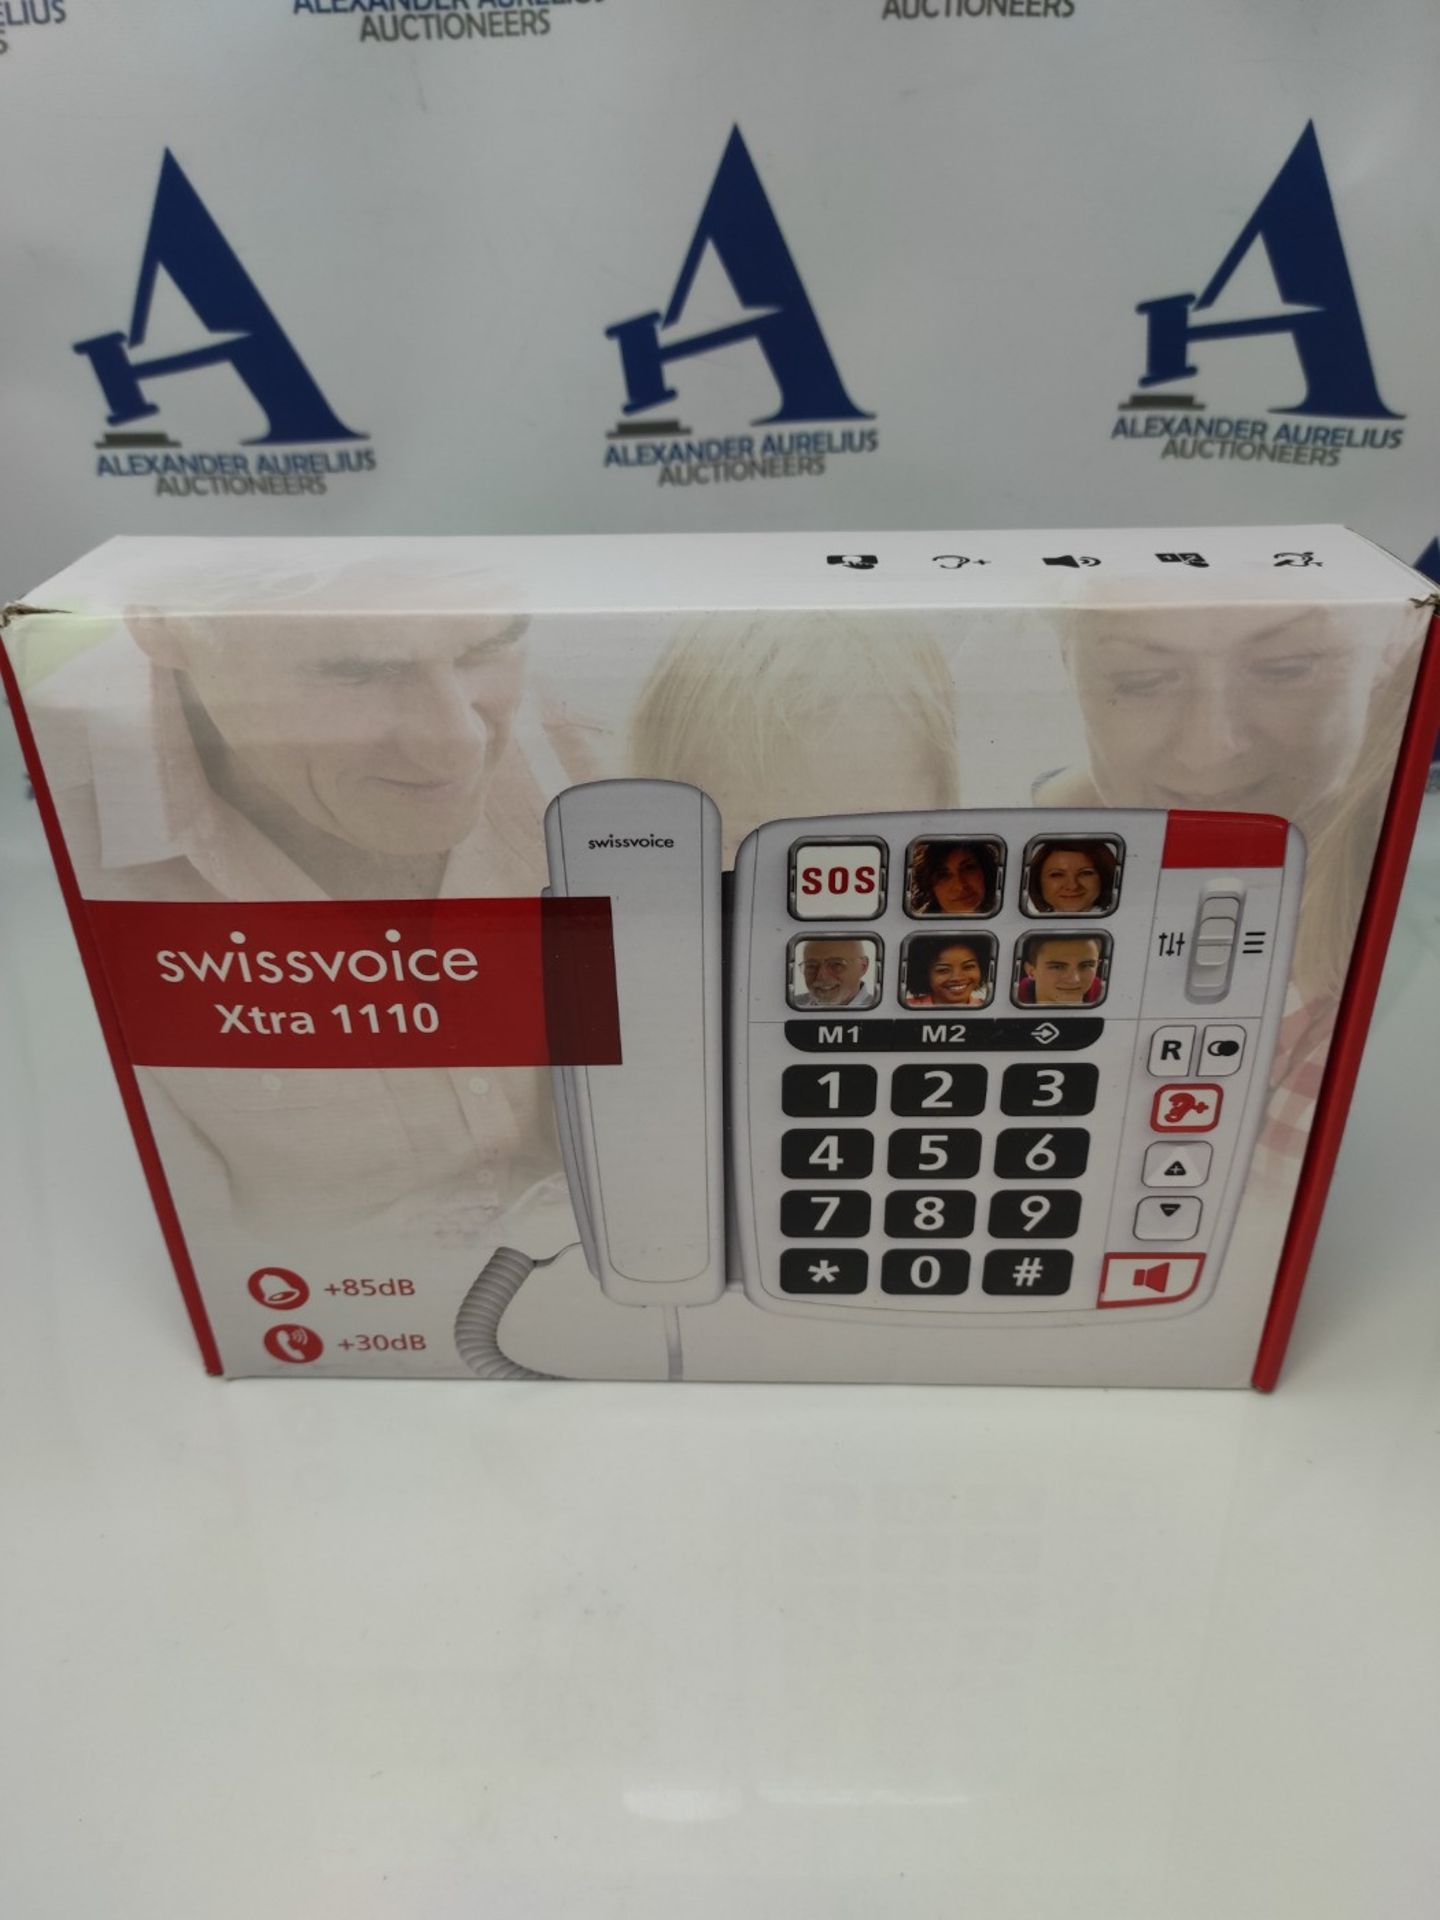 SWISSVOICE Xtra 1110 - Big Button Phone for Elderly - Phones for Hard of Hearing - Dem - Image 2 of 3